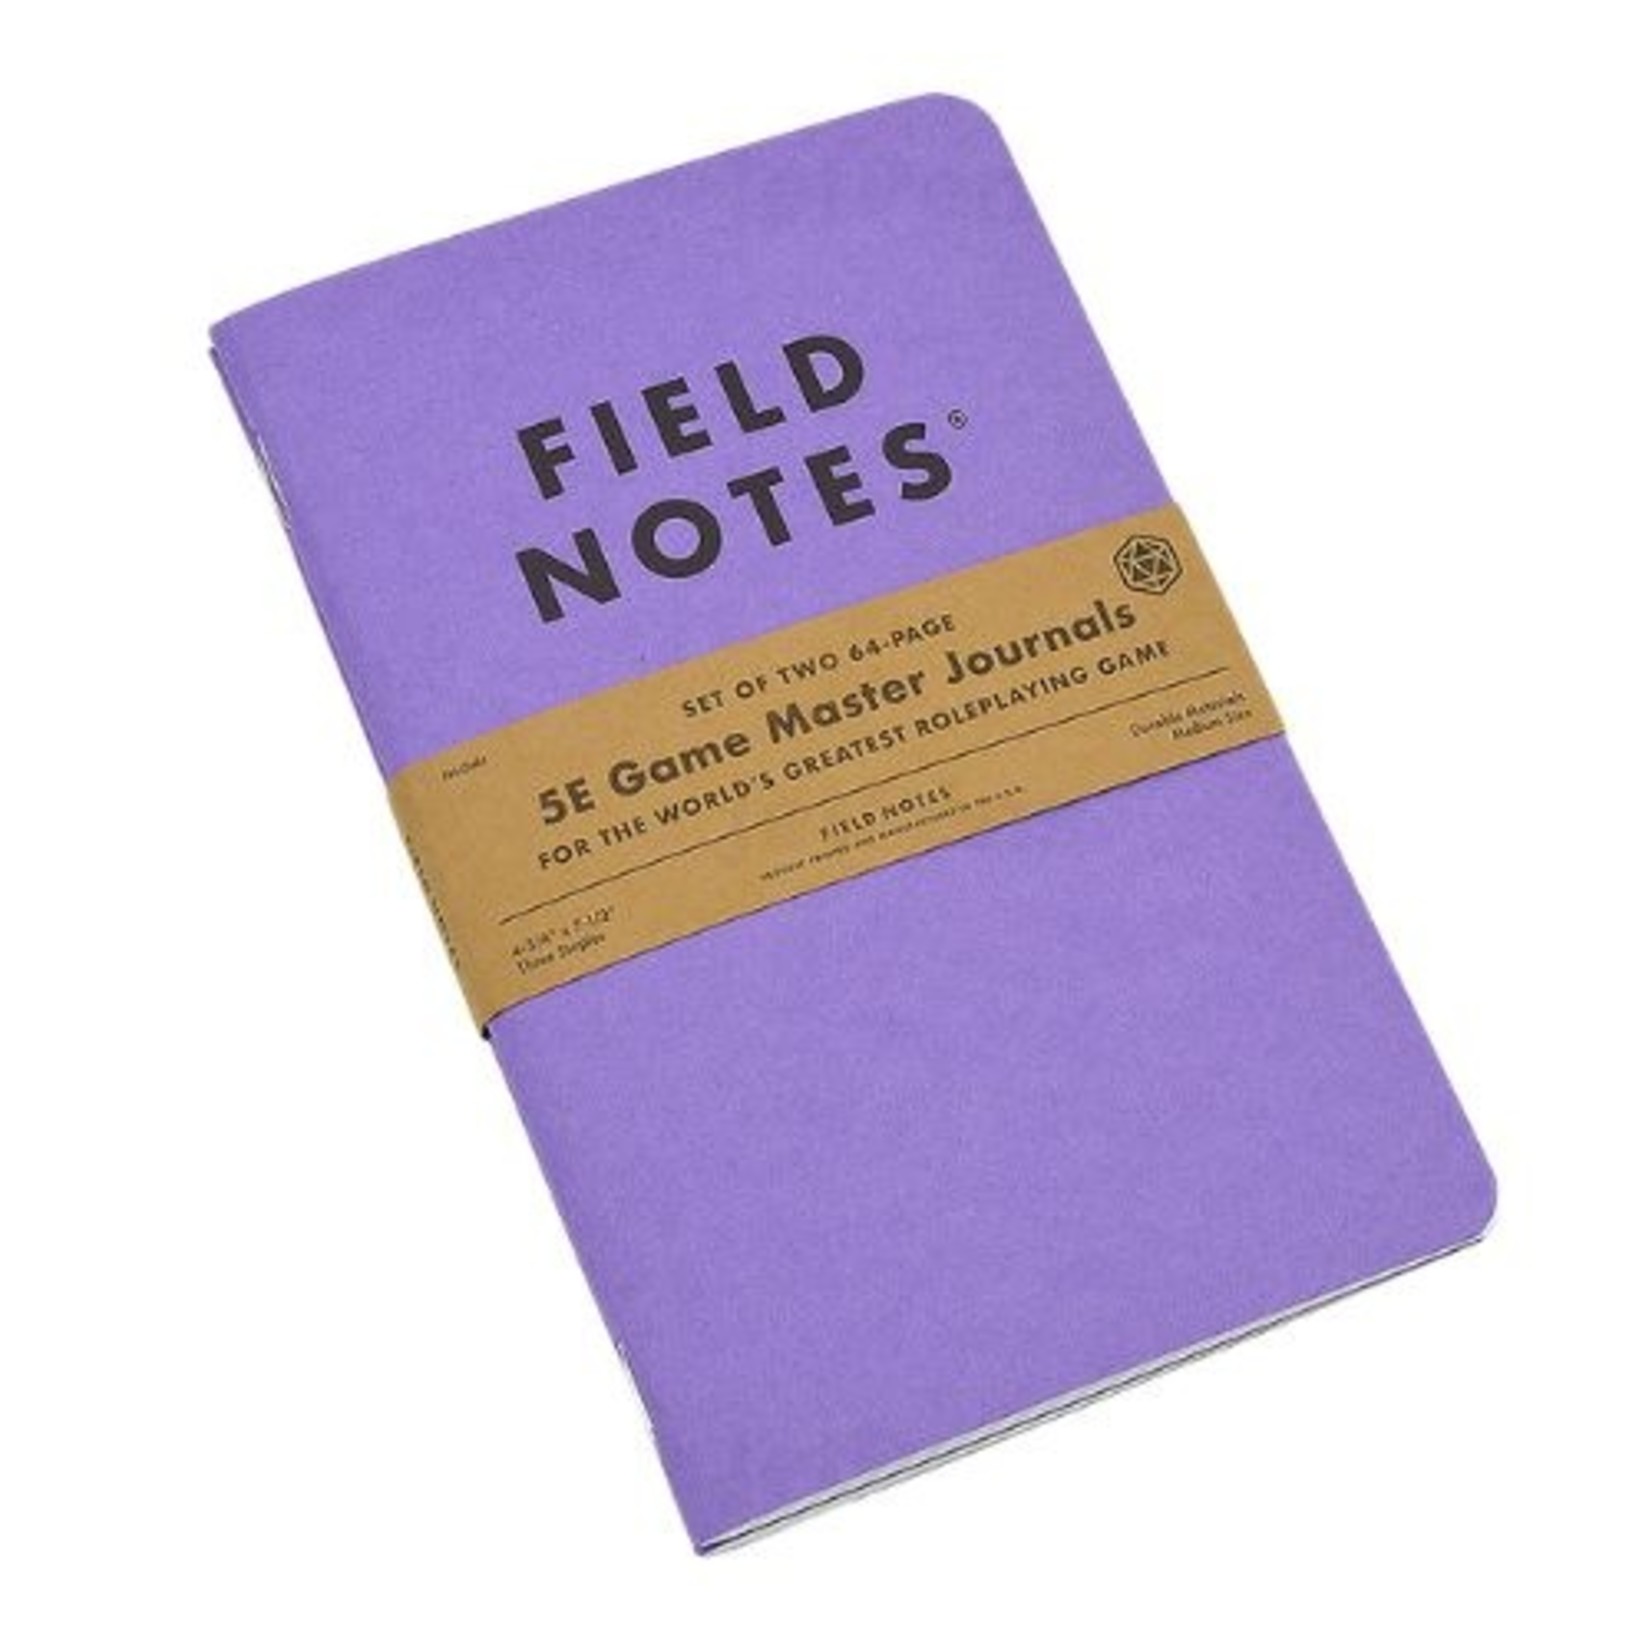 Field Notes Game Master Journals (5th Edition, Set of 2)